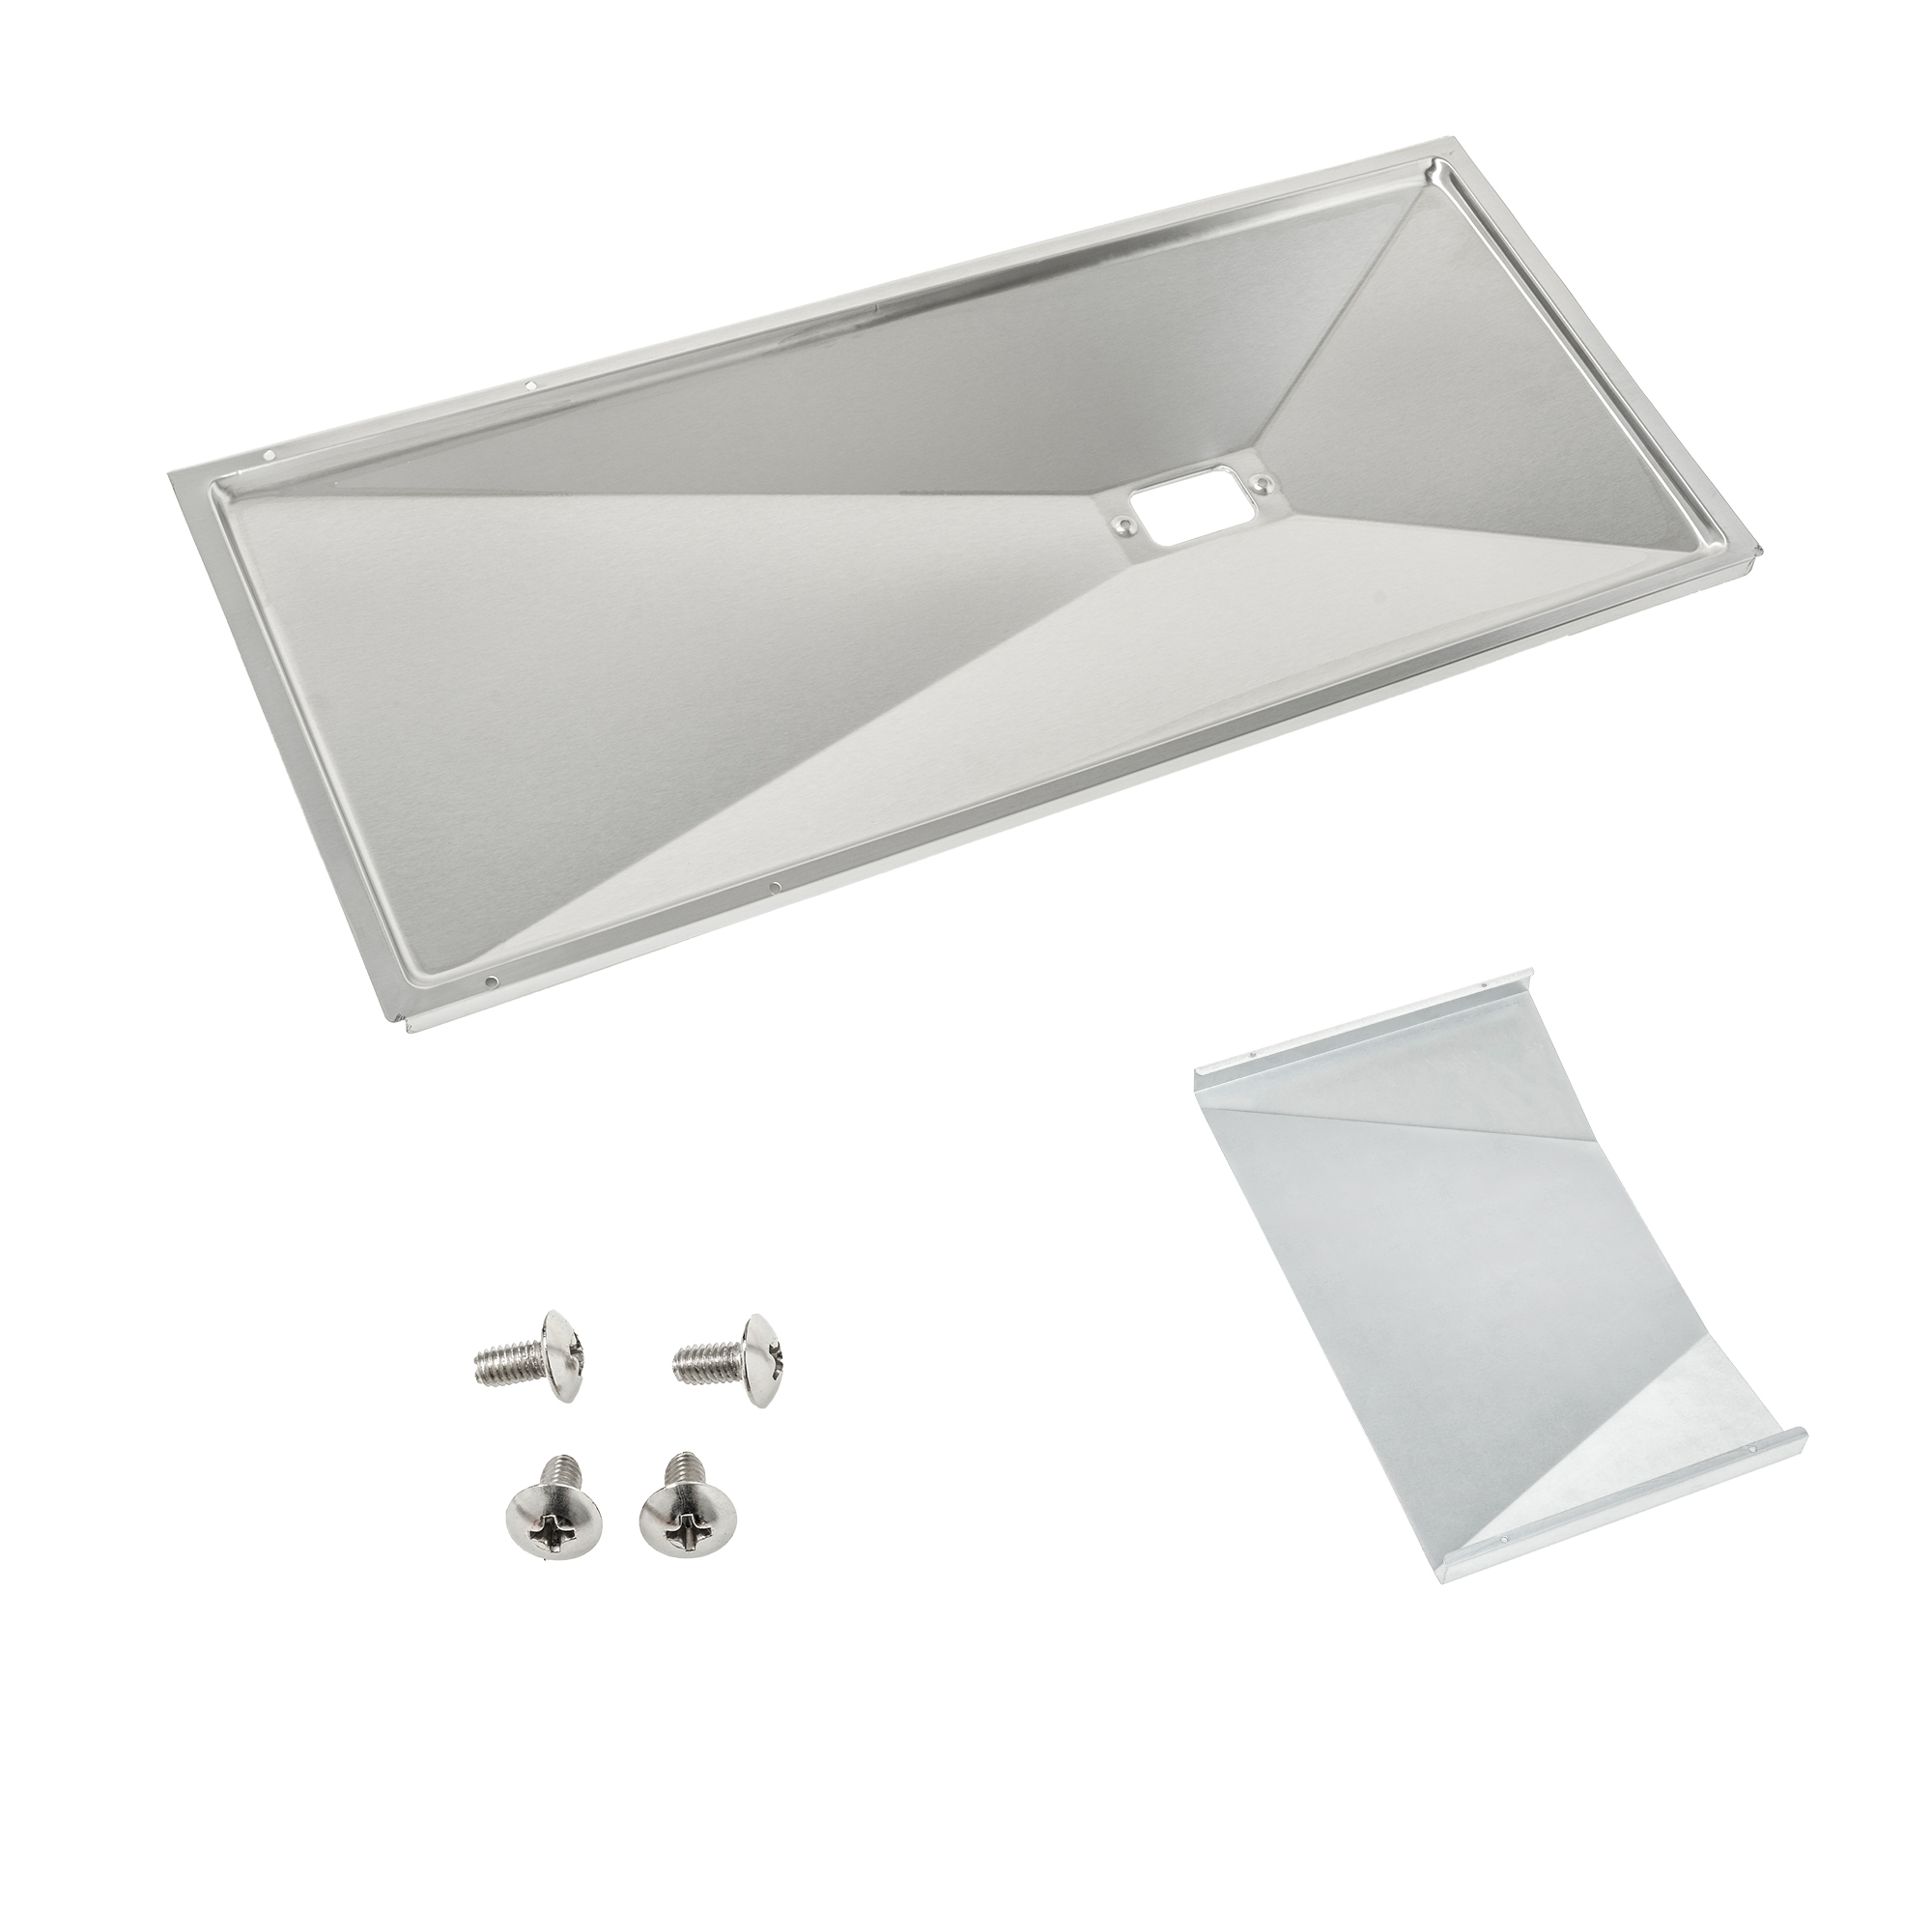 Grease tray Videro G6/G6-S stainless steel - w. heat insulation board